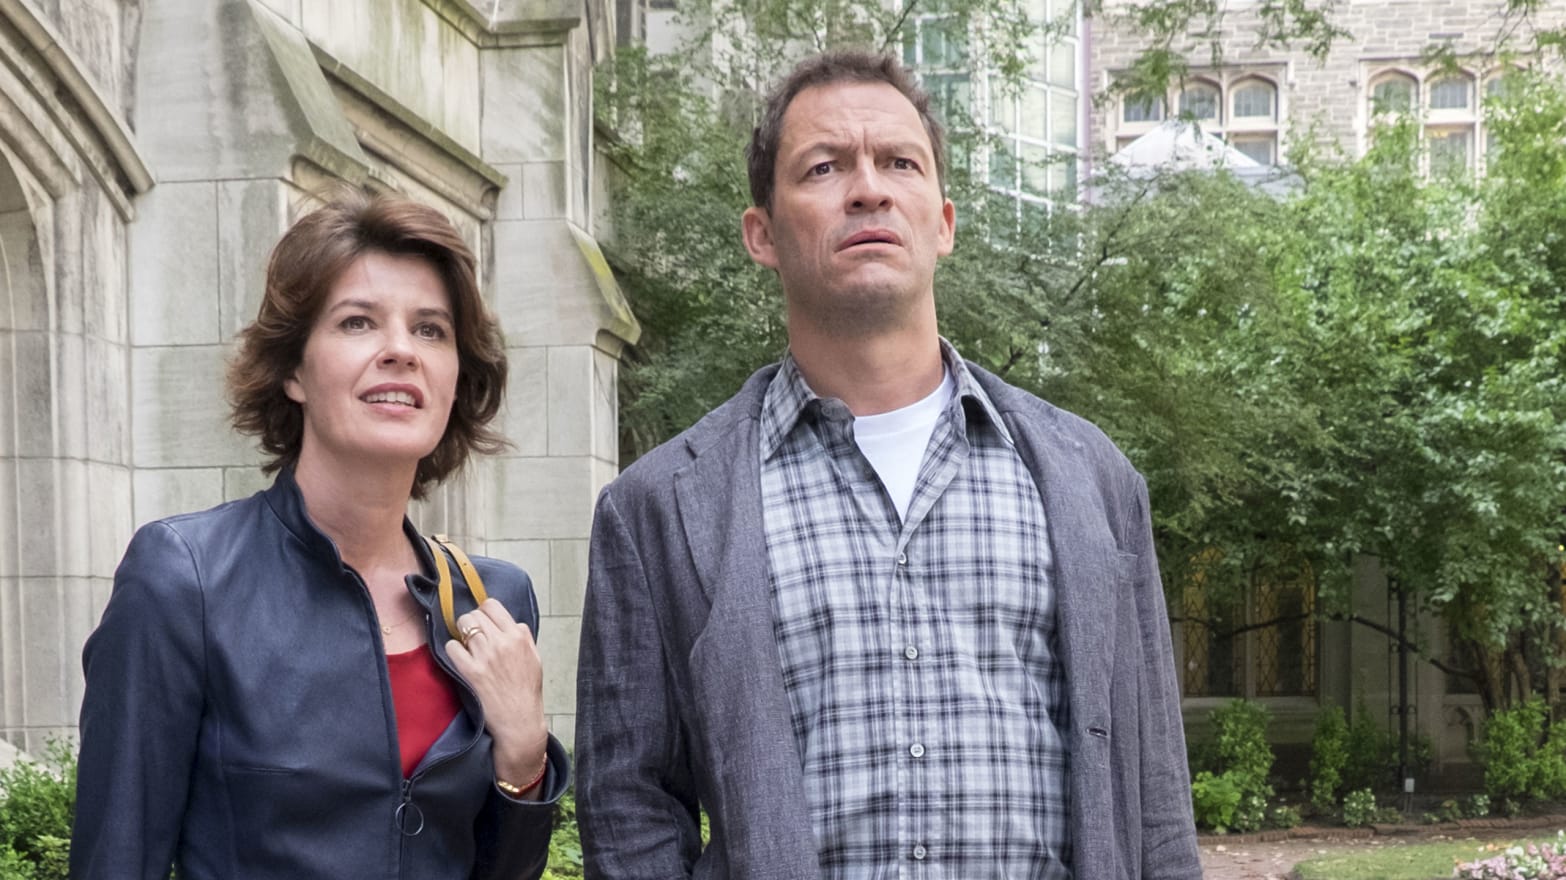 The Affair Returns With Sex Violence And Campus Protests